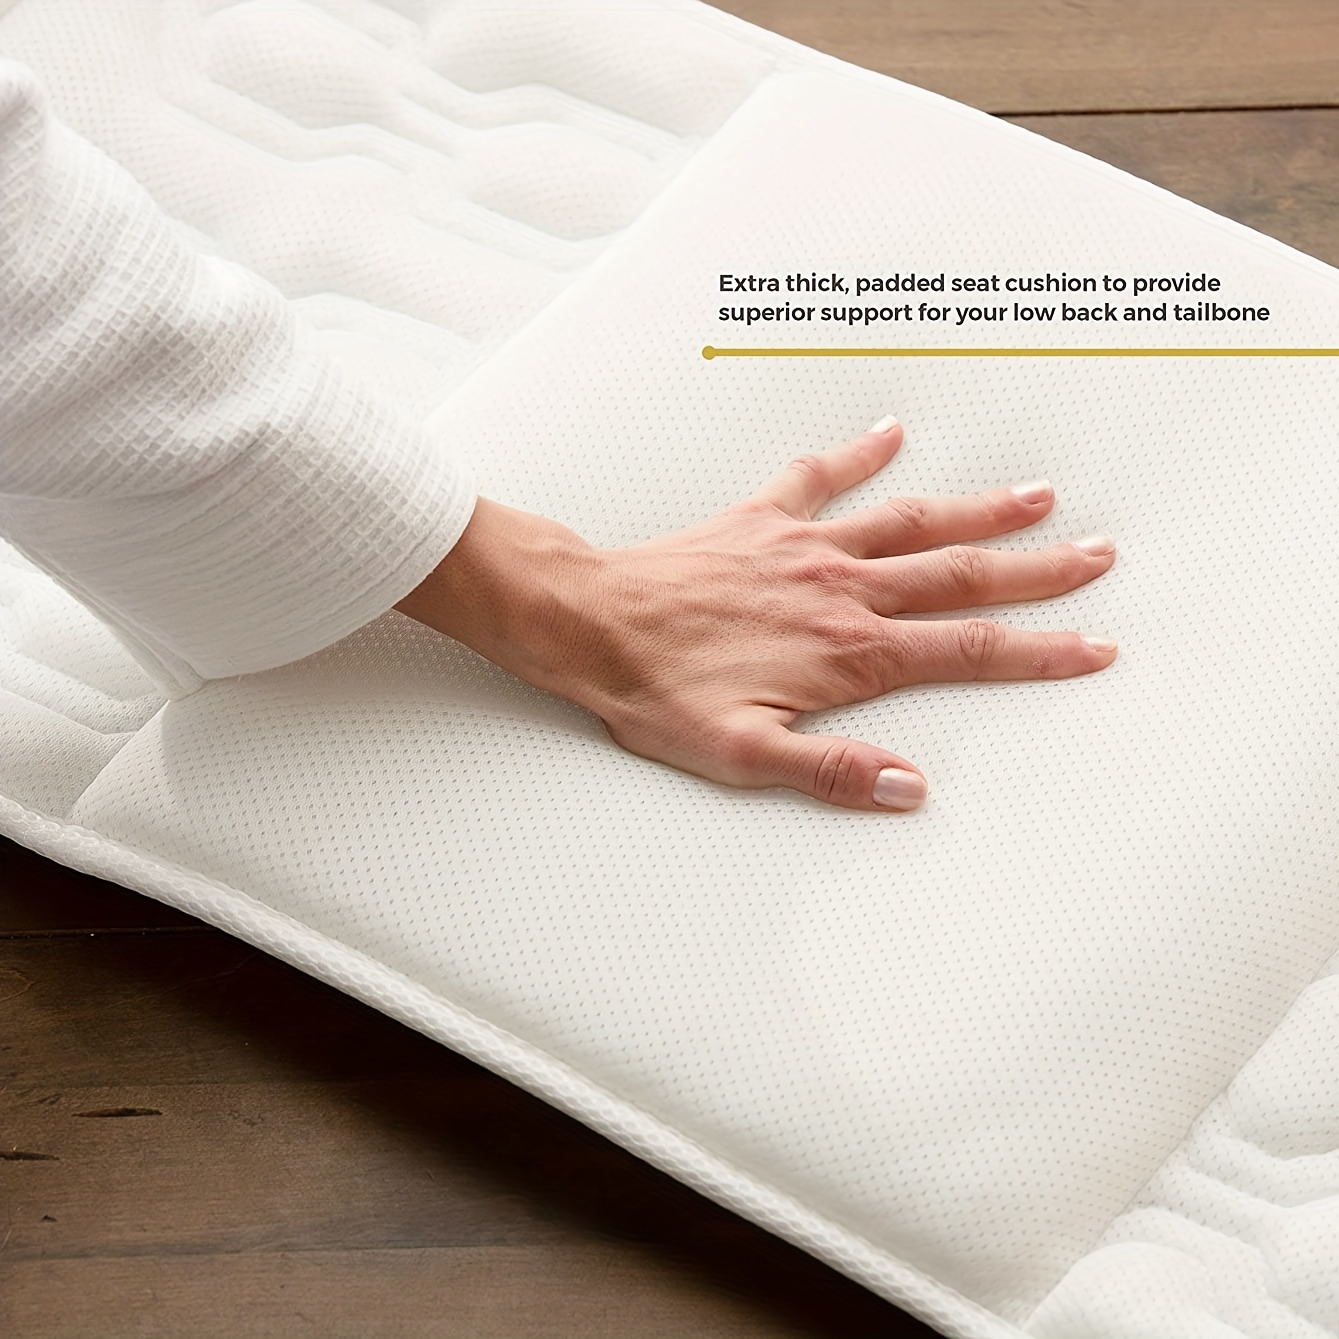 Full Body Spa Bath Pillow Mat, Bathtub Mattress Luxury Cushion with Large  Suction Cups, Comfort Support Your Head, Neck, Shoulder, Back and Tailbone